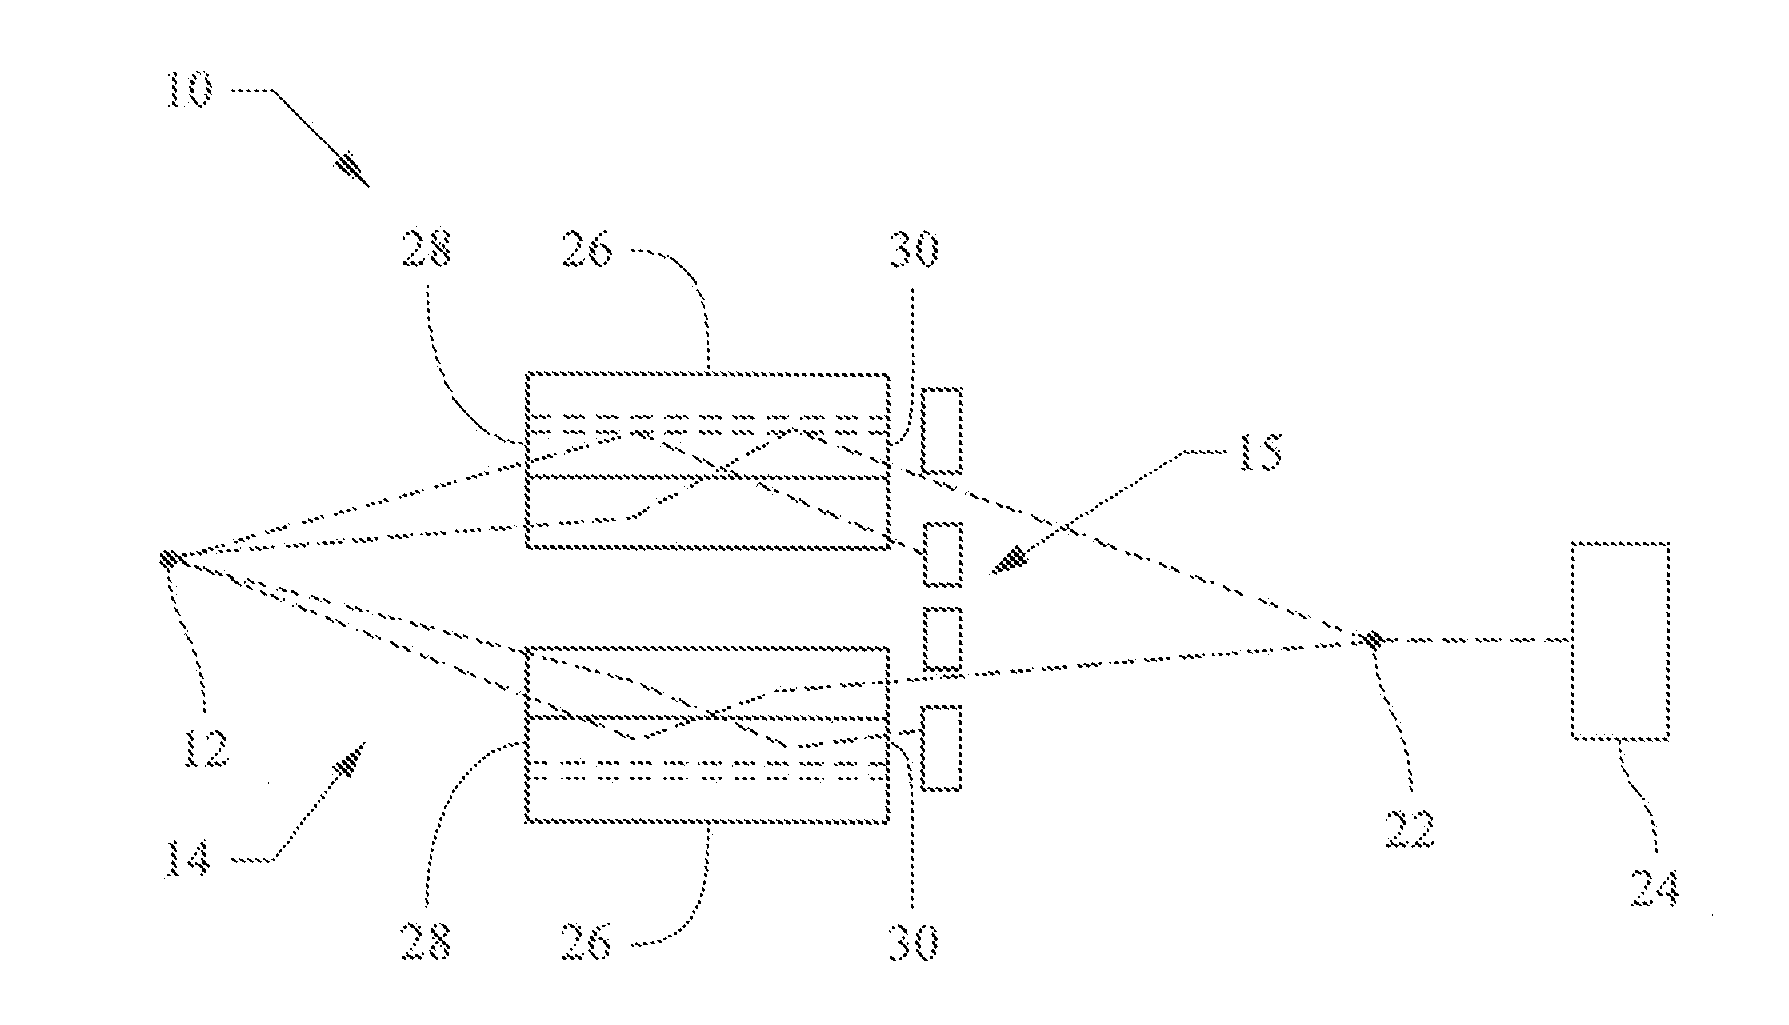 X-ray optical systems with adjustable convergence and focal spot size